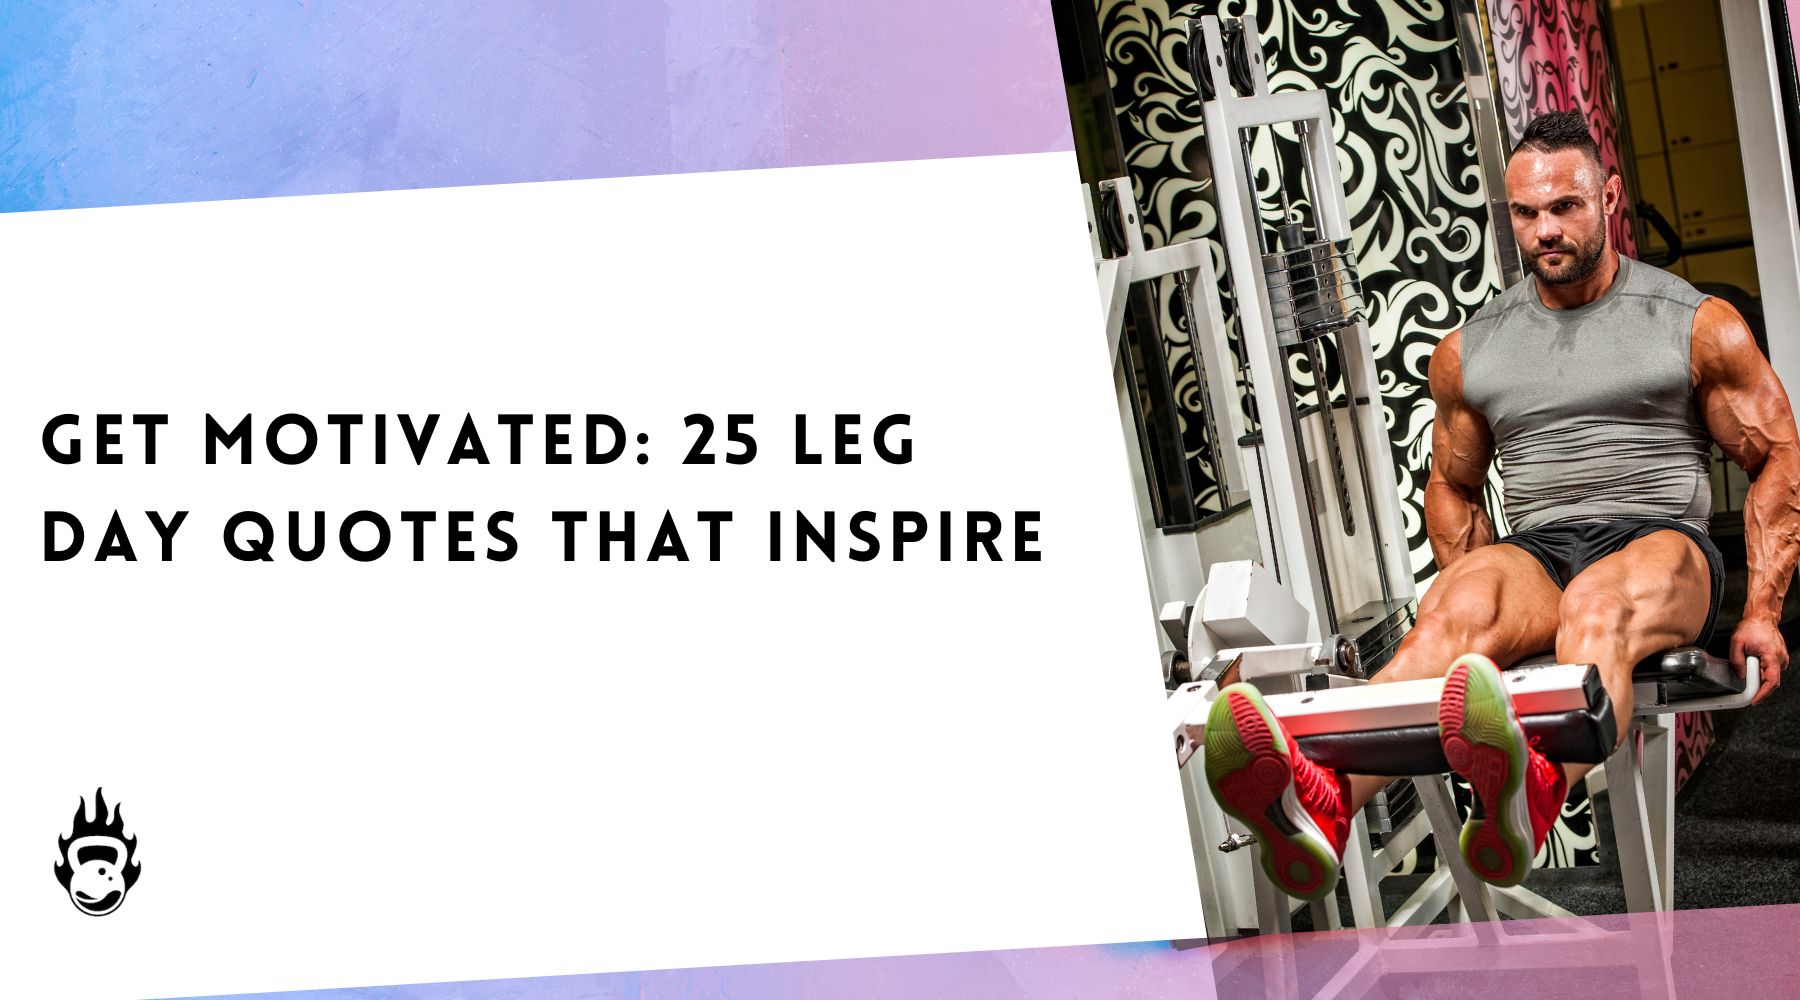 Get Motivated: 25 Leg Day Quotes That Inspire